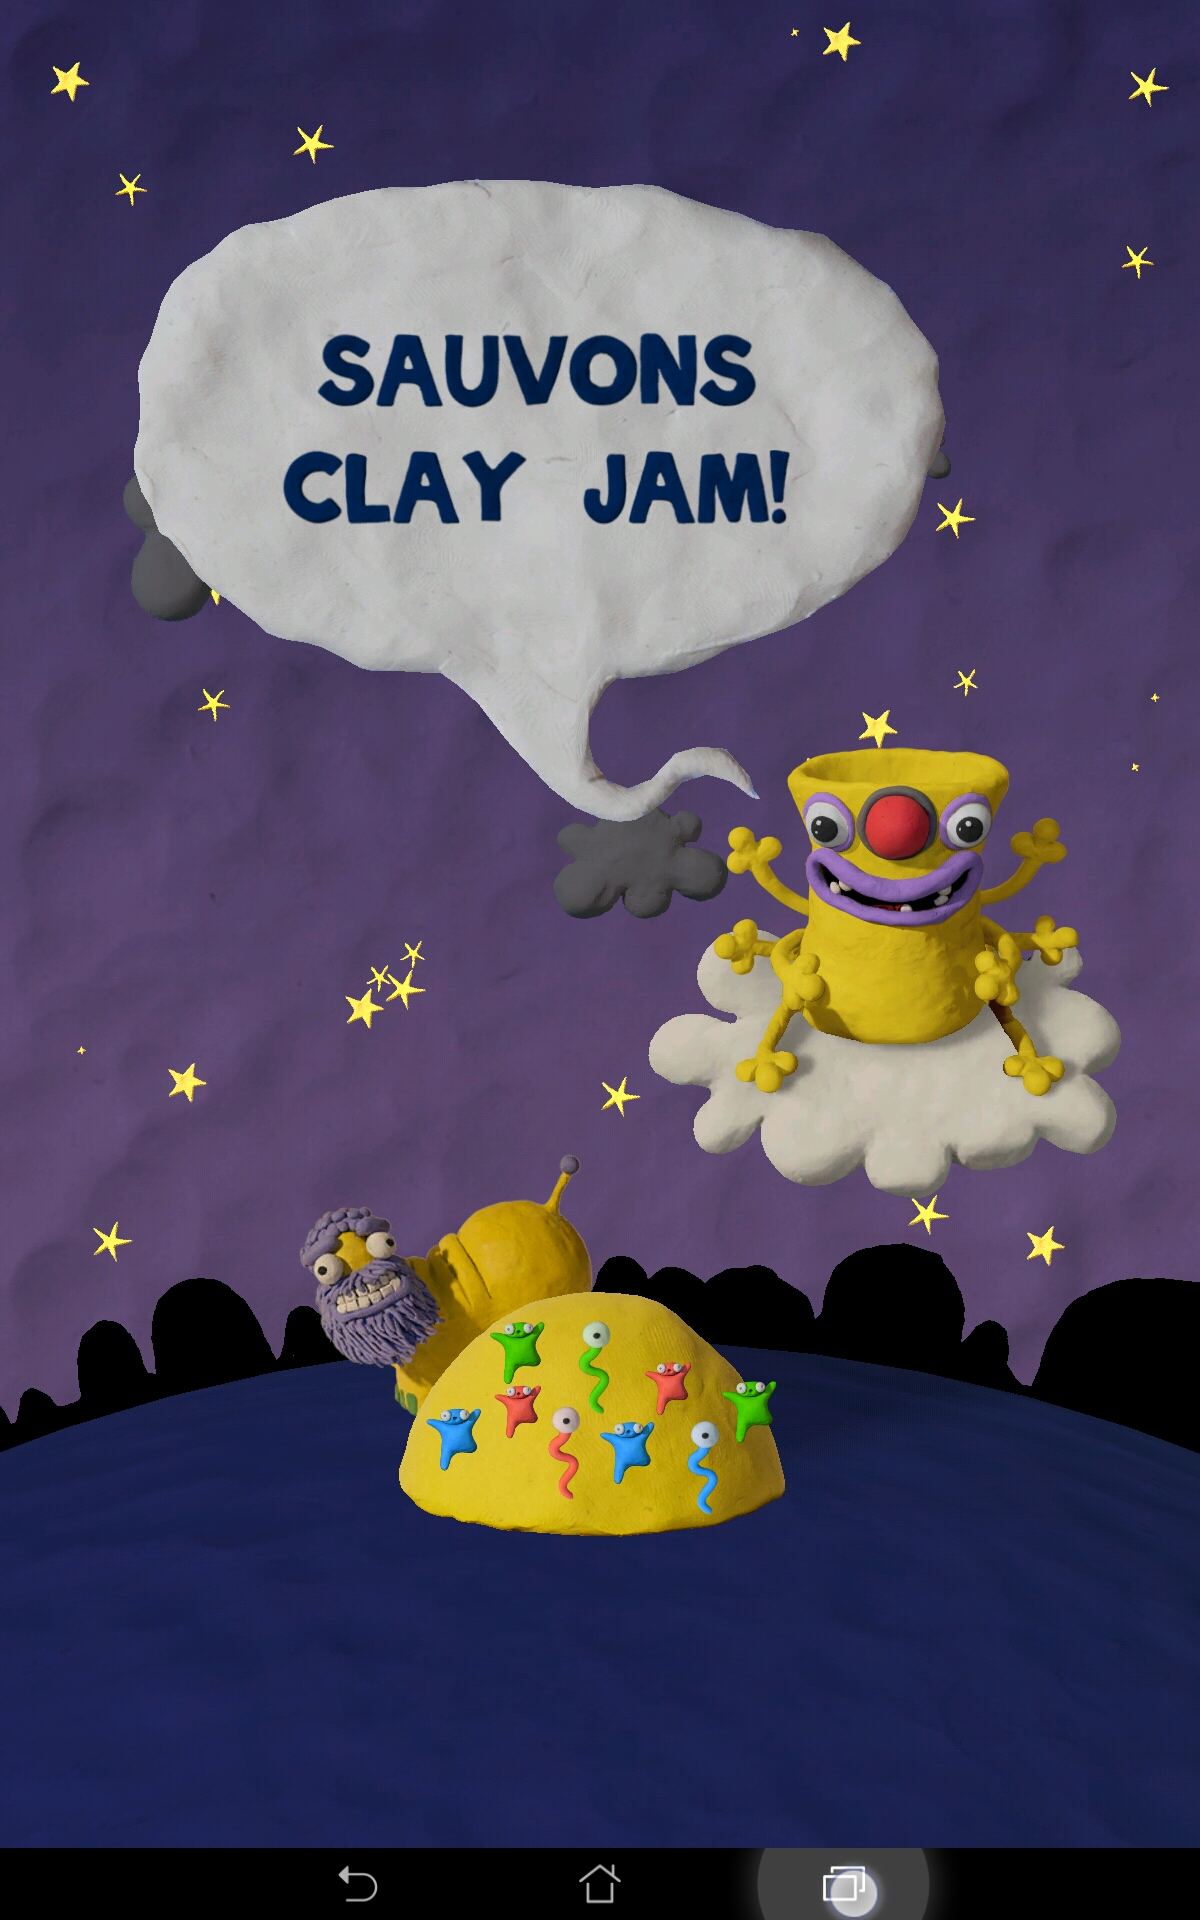 Clay Jam cute intro image with clay puppets of the various characters illustrated.